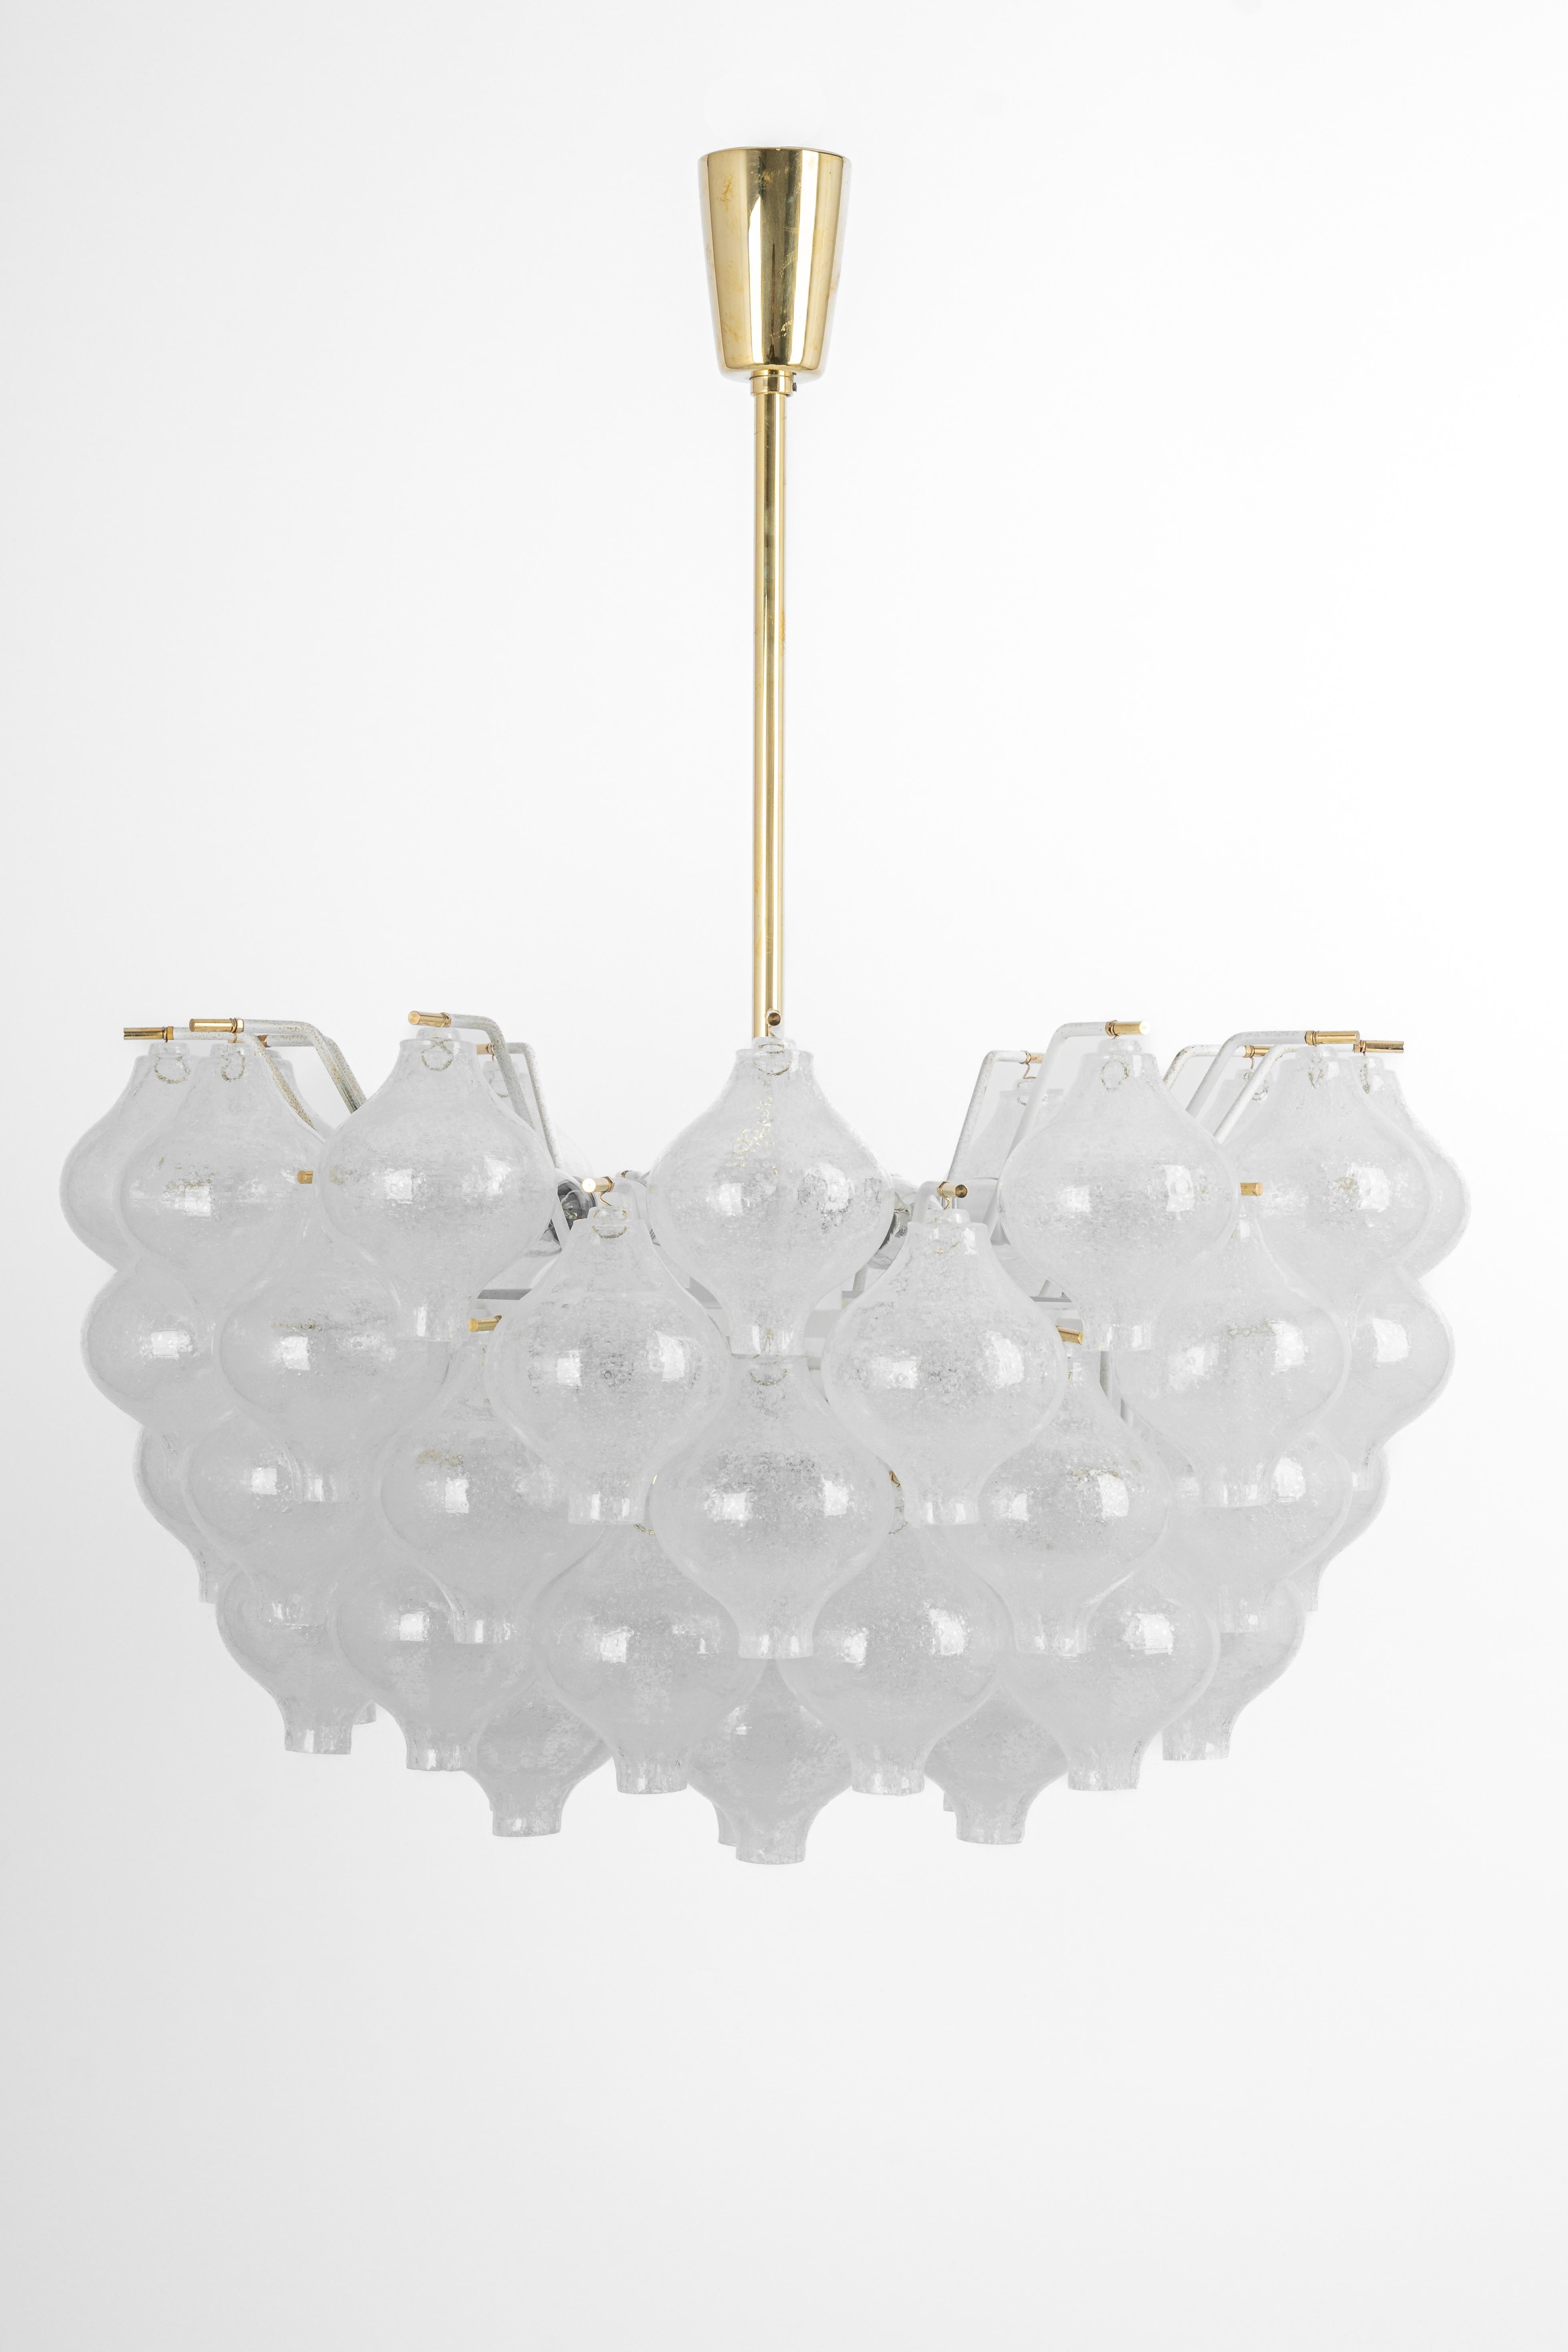 Wonderful onion shaped -Tulipan glass chandelier. Many hand blown glasses suspended on white painted metal frame and brass center rod.
Best of design from the 1960s by Kalmar, Austria. High quality of the materials.

Sockets: 12 x E14/ or E12